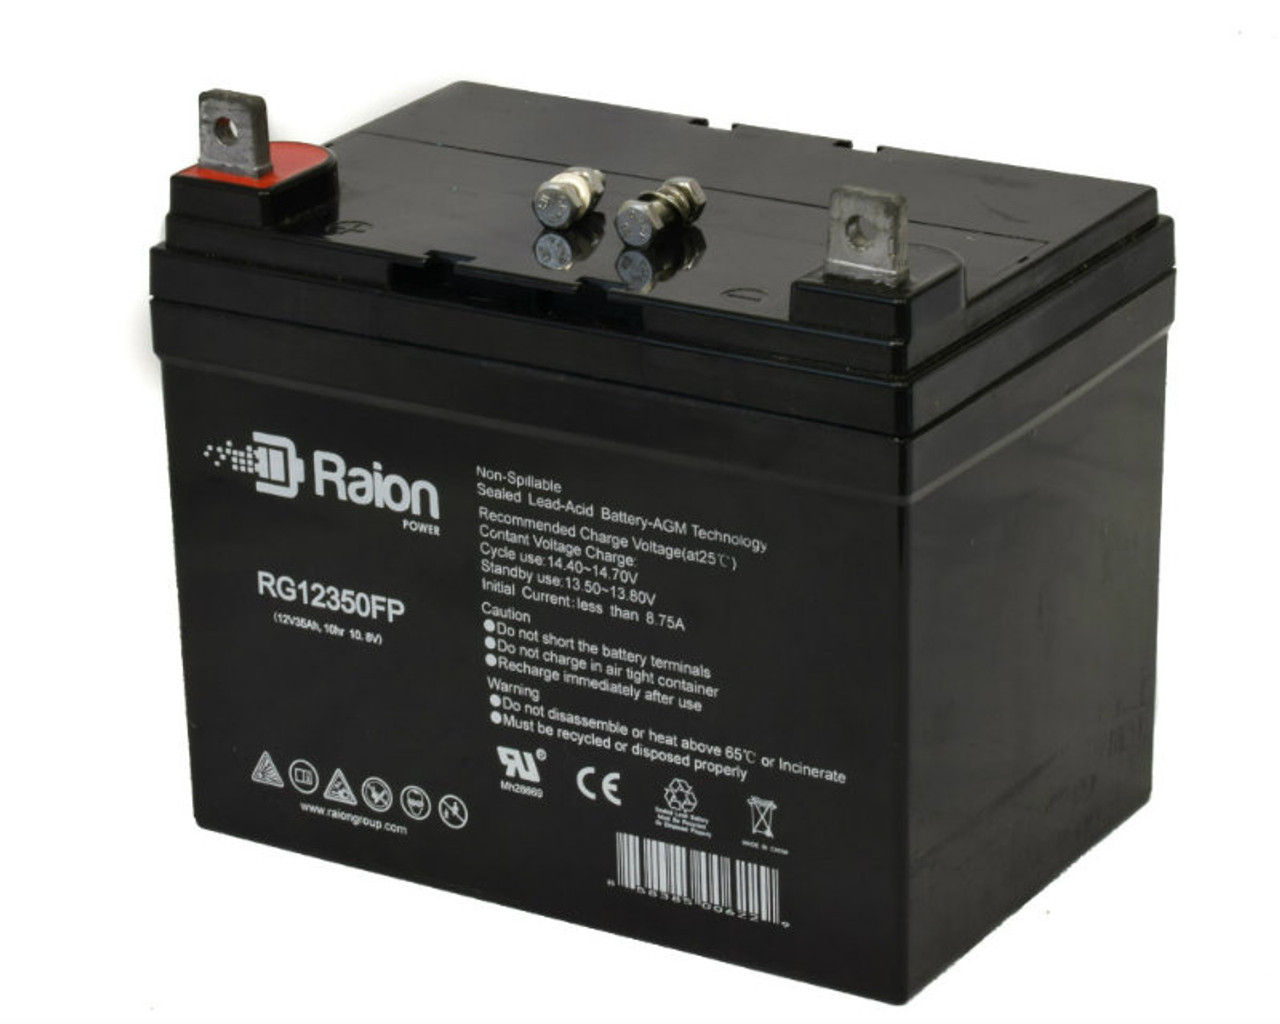 Raion Power Replacement 12V 35Ah RG12350FP Mobility Scooter Battery for Bruno Model 30